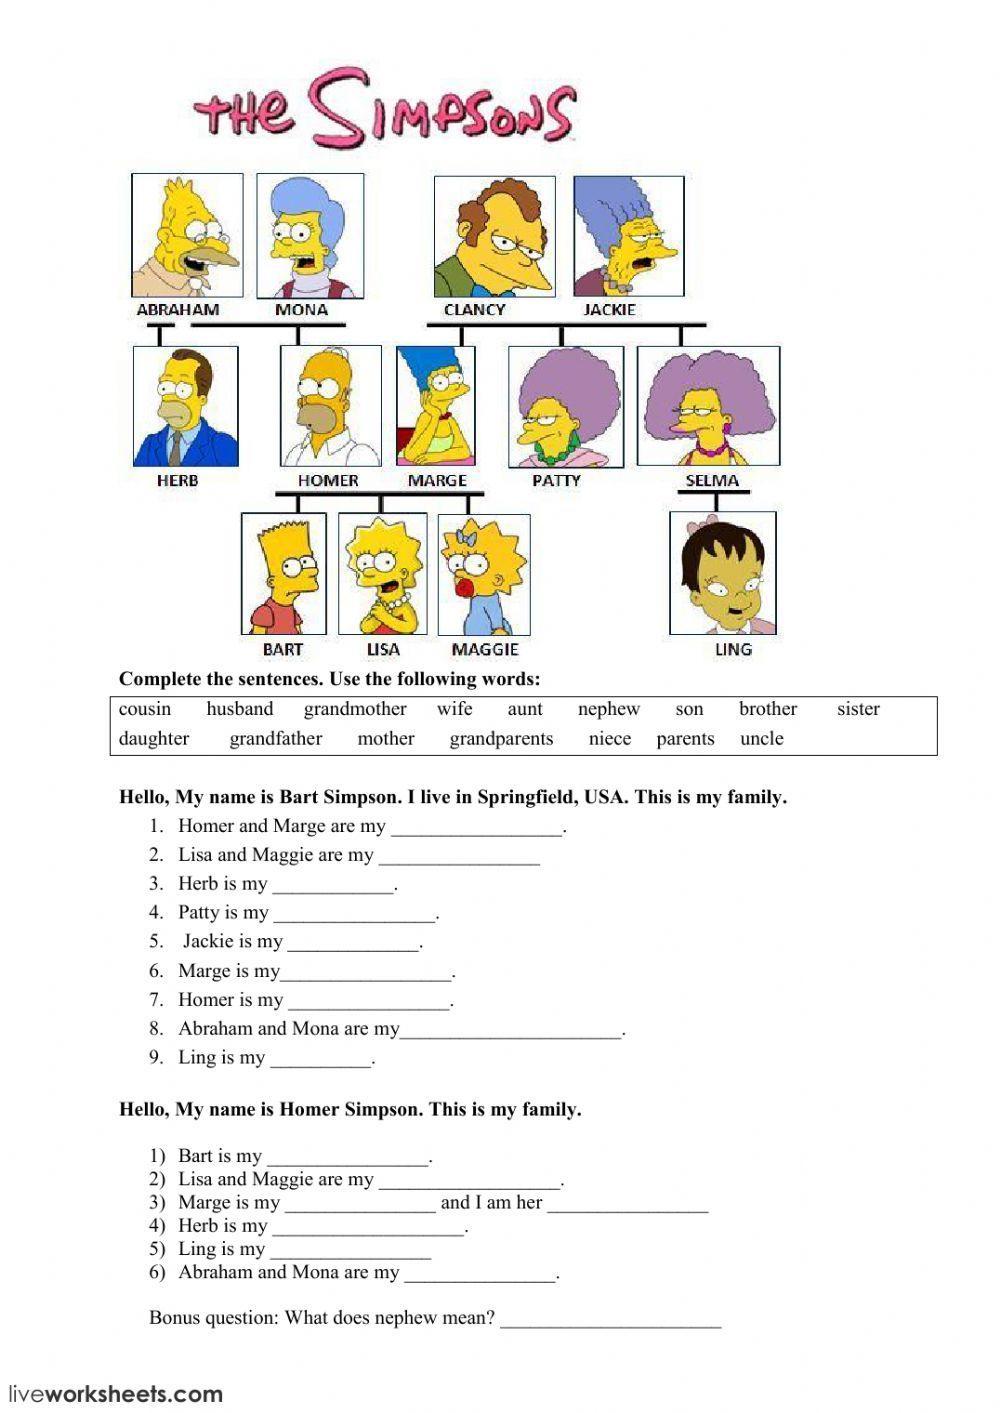 Family - using the Simpsons